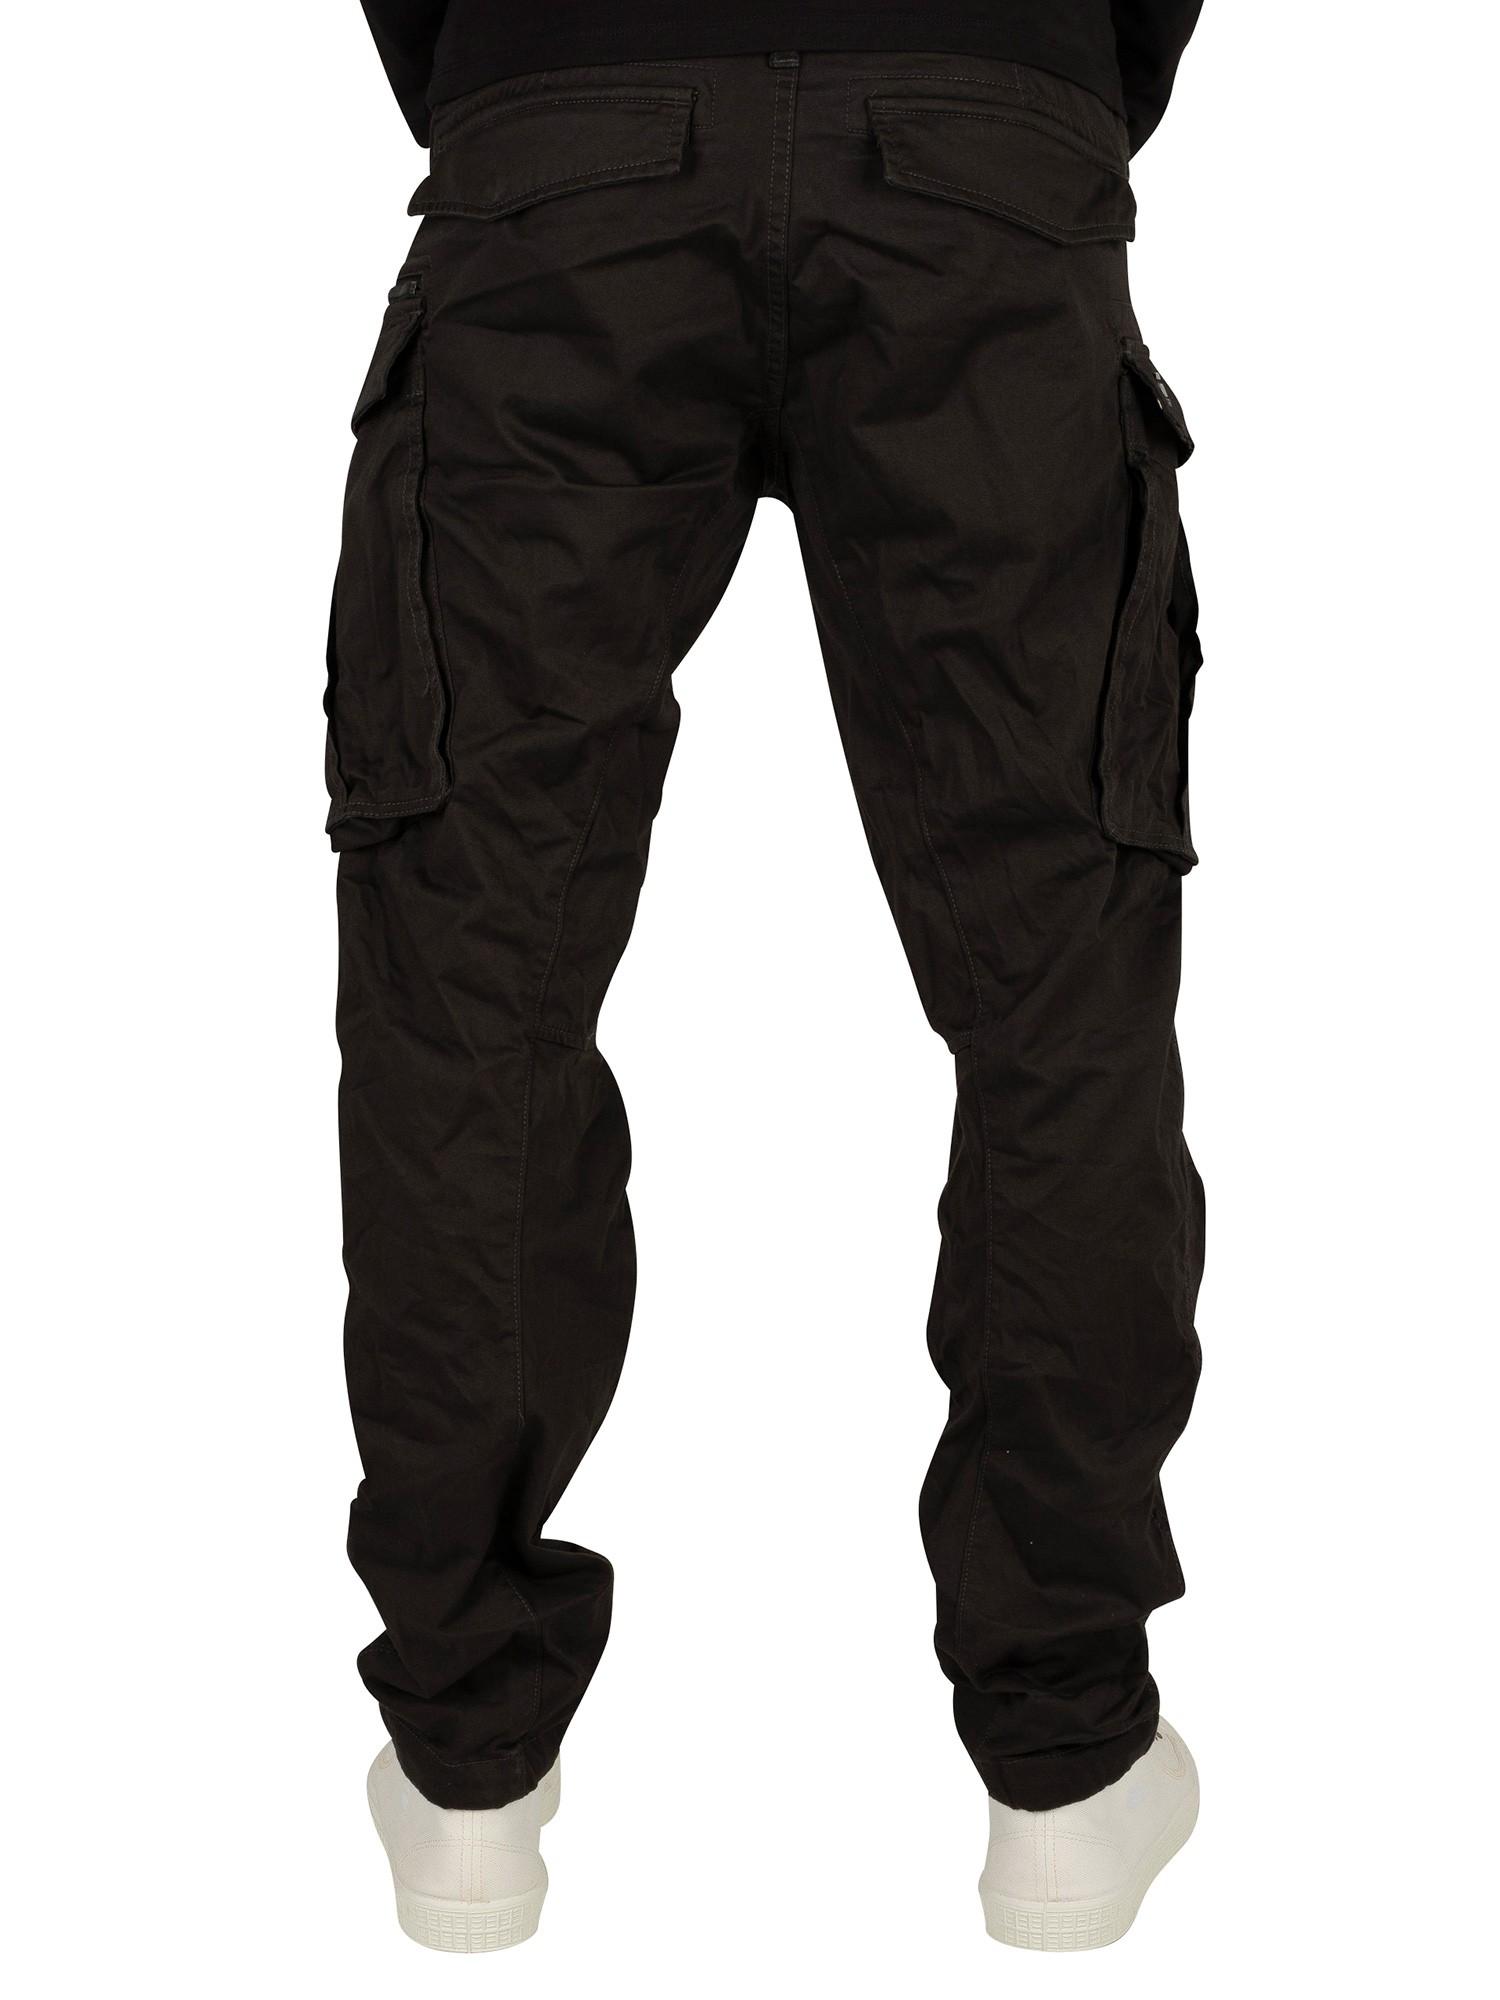 G-Star RAW Rovic Zip 3d Tapered Cargos in Black for Men - Lyst